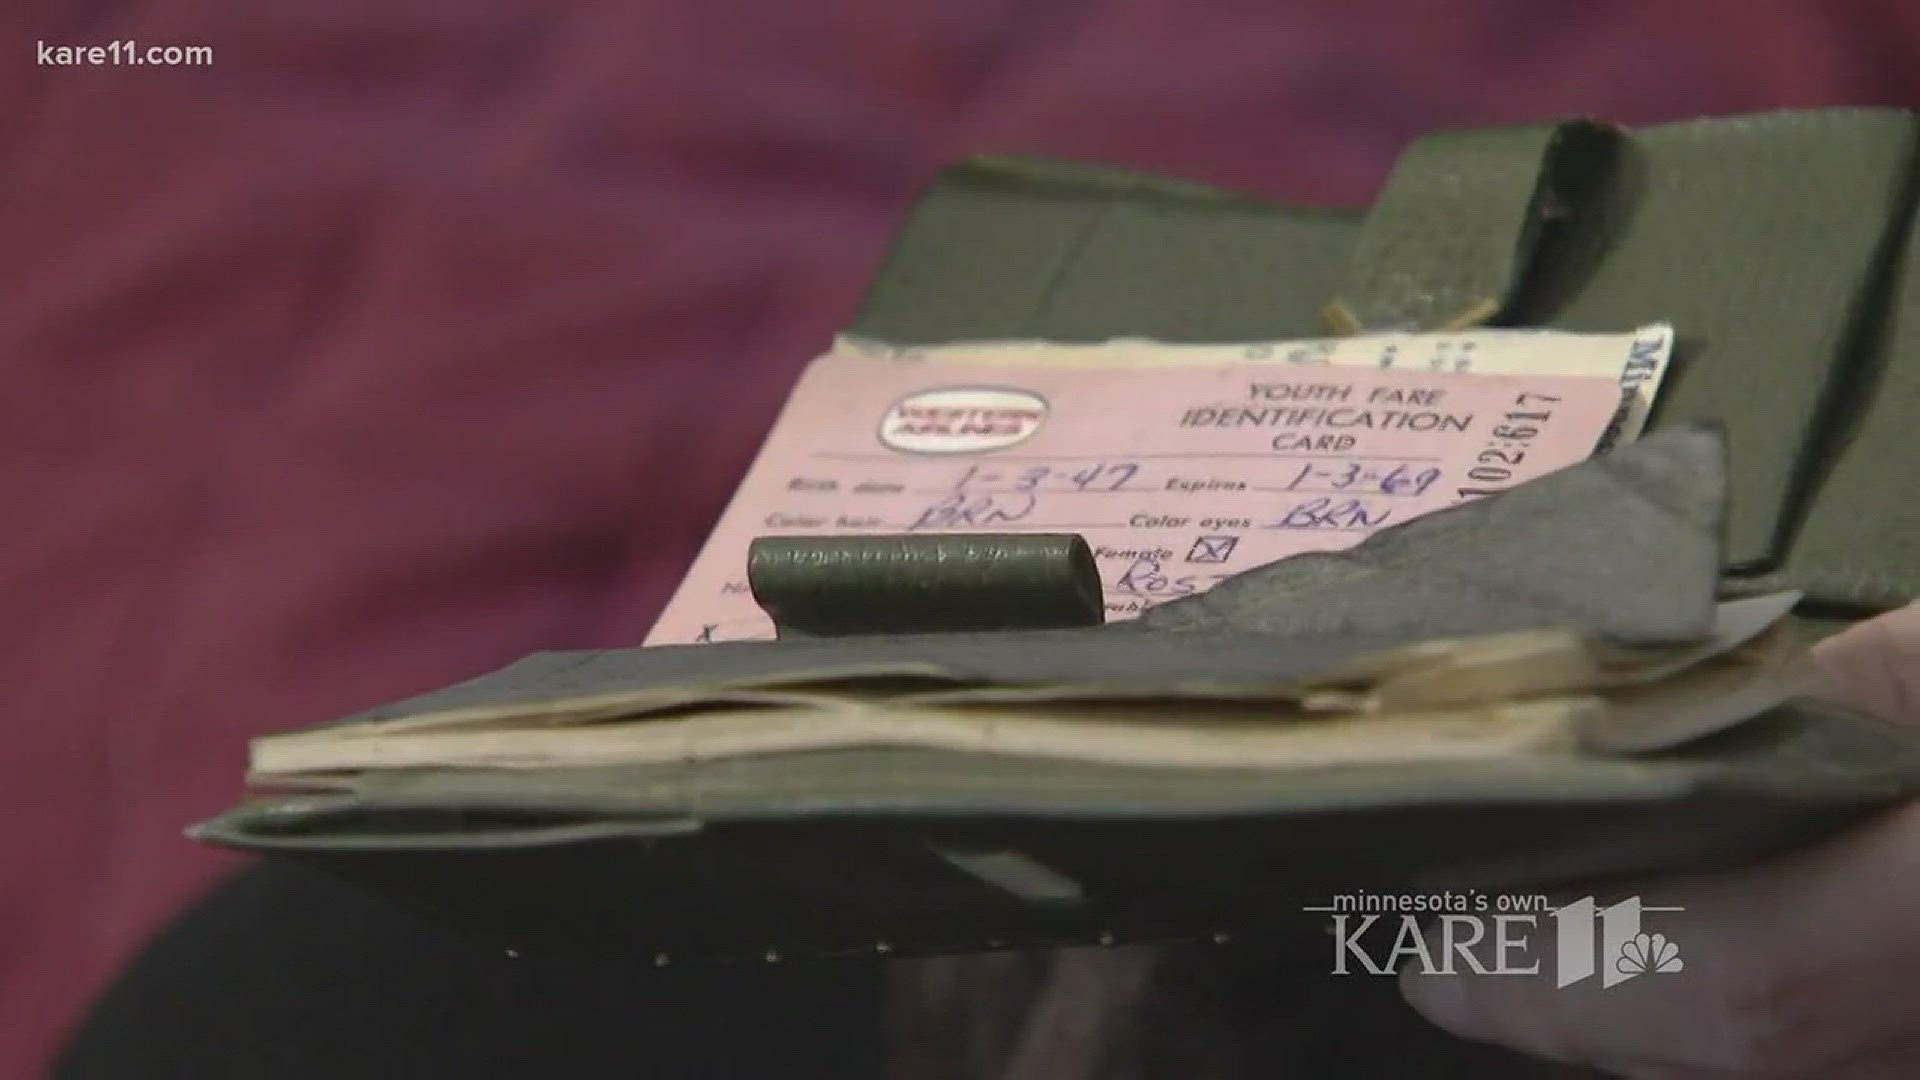 A former Dayton's employee has been reunited with her wallet, lost in the former Minneapolis department store for nearly 50 years. http://kare11.tv/2tYIWTu